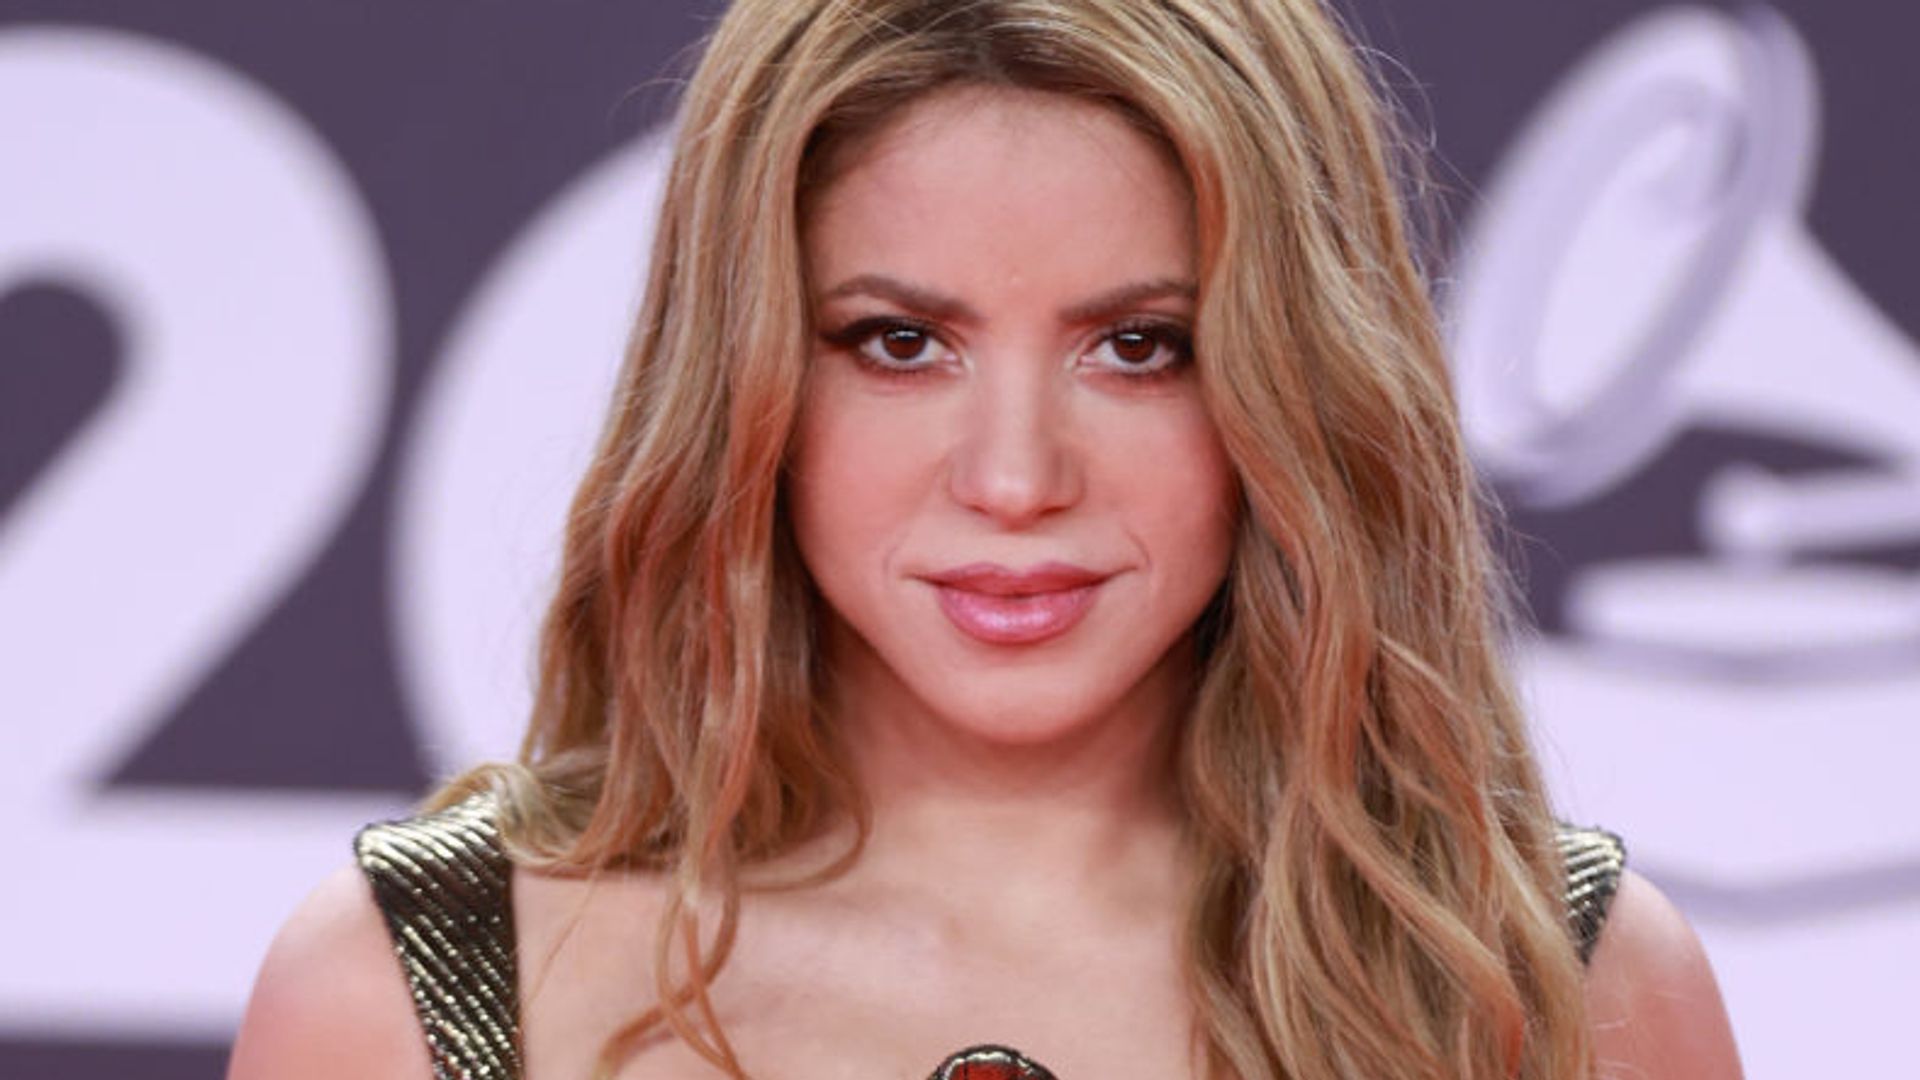 Shakira's adorable young sons look as tall as she is in new celebratory photo